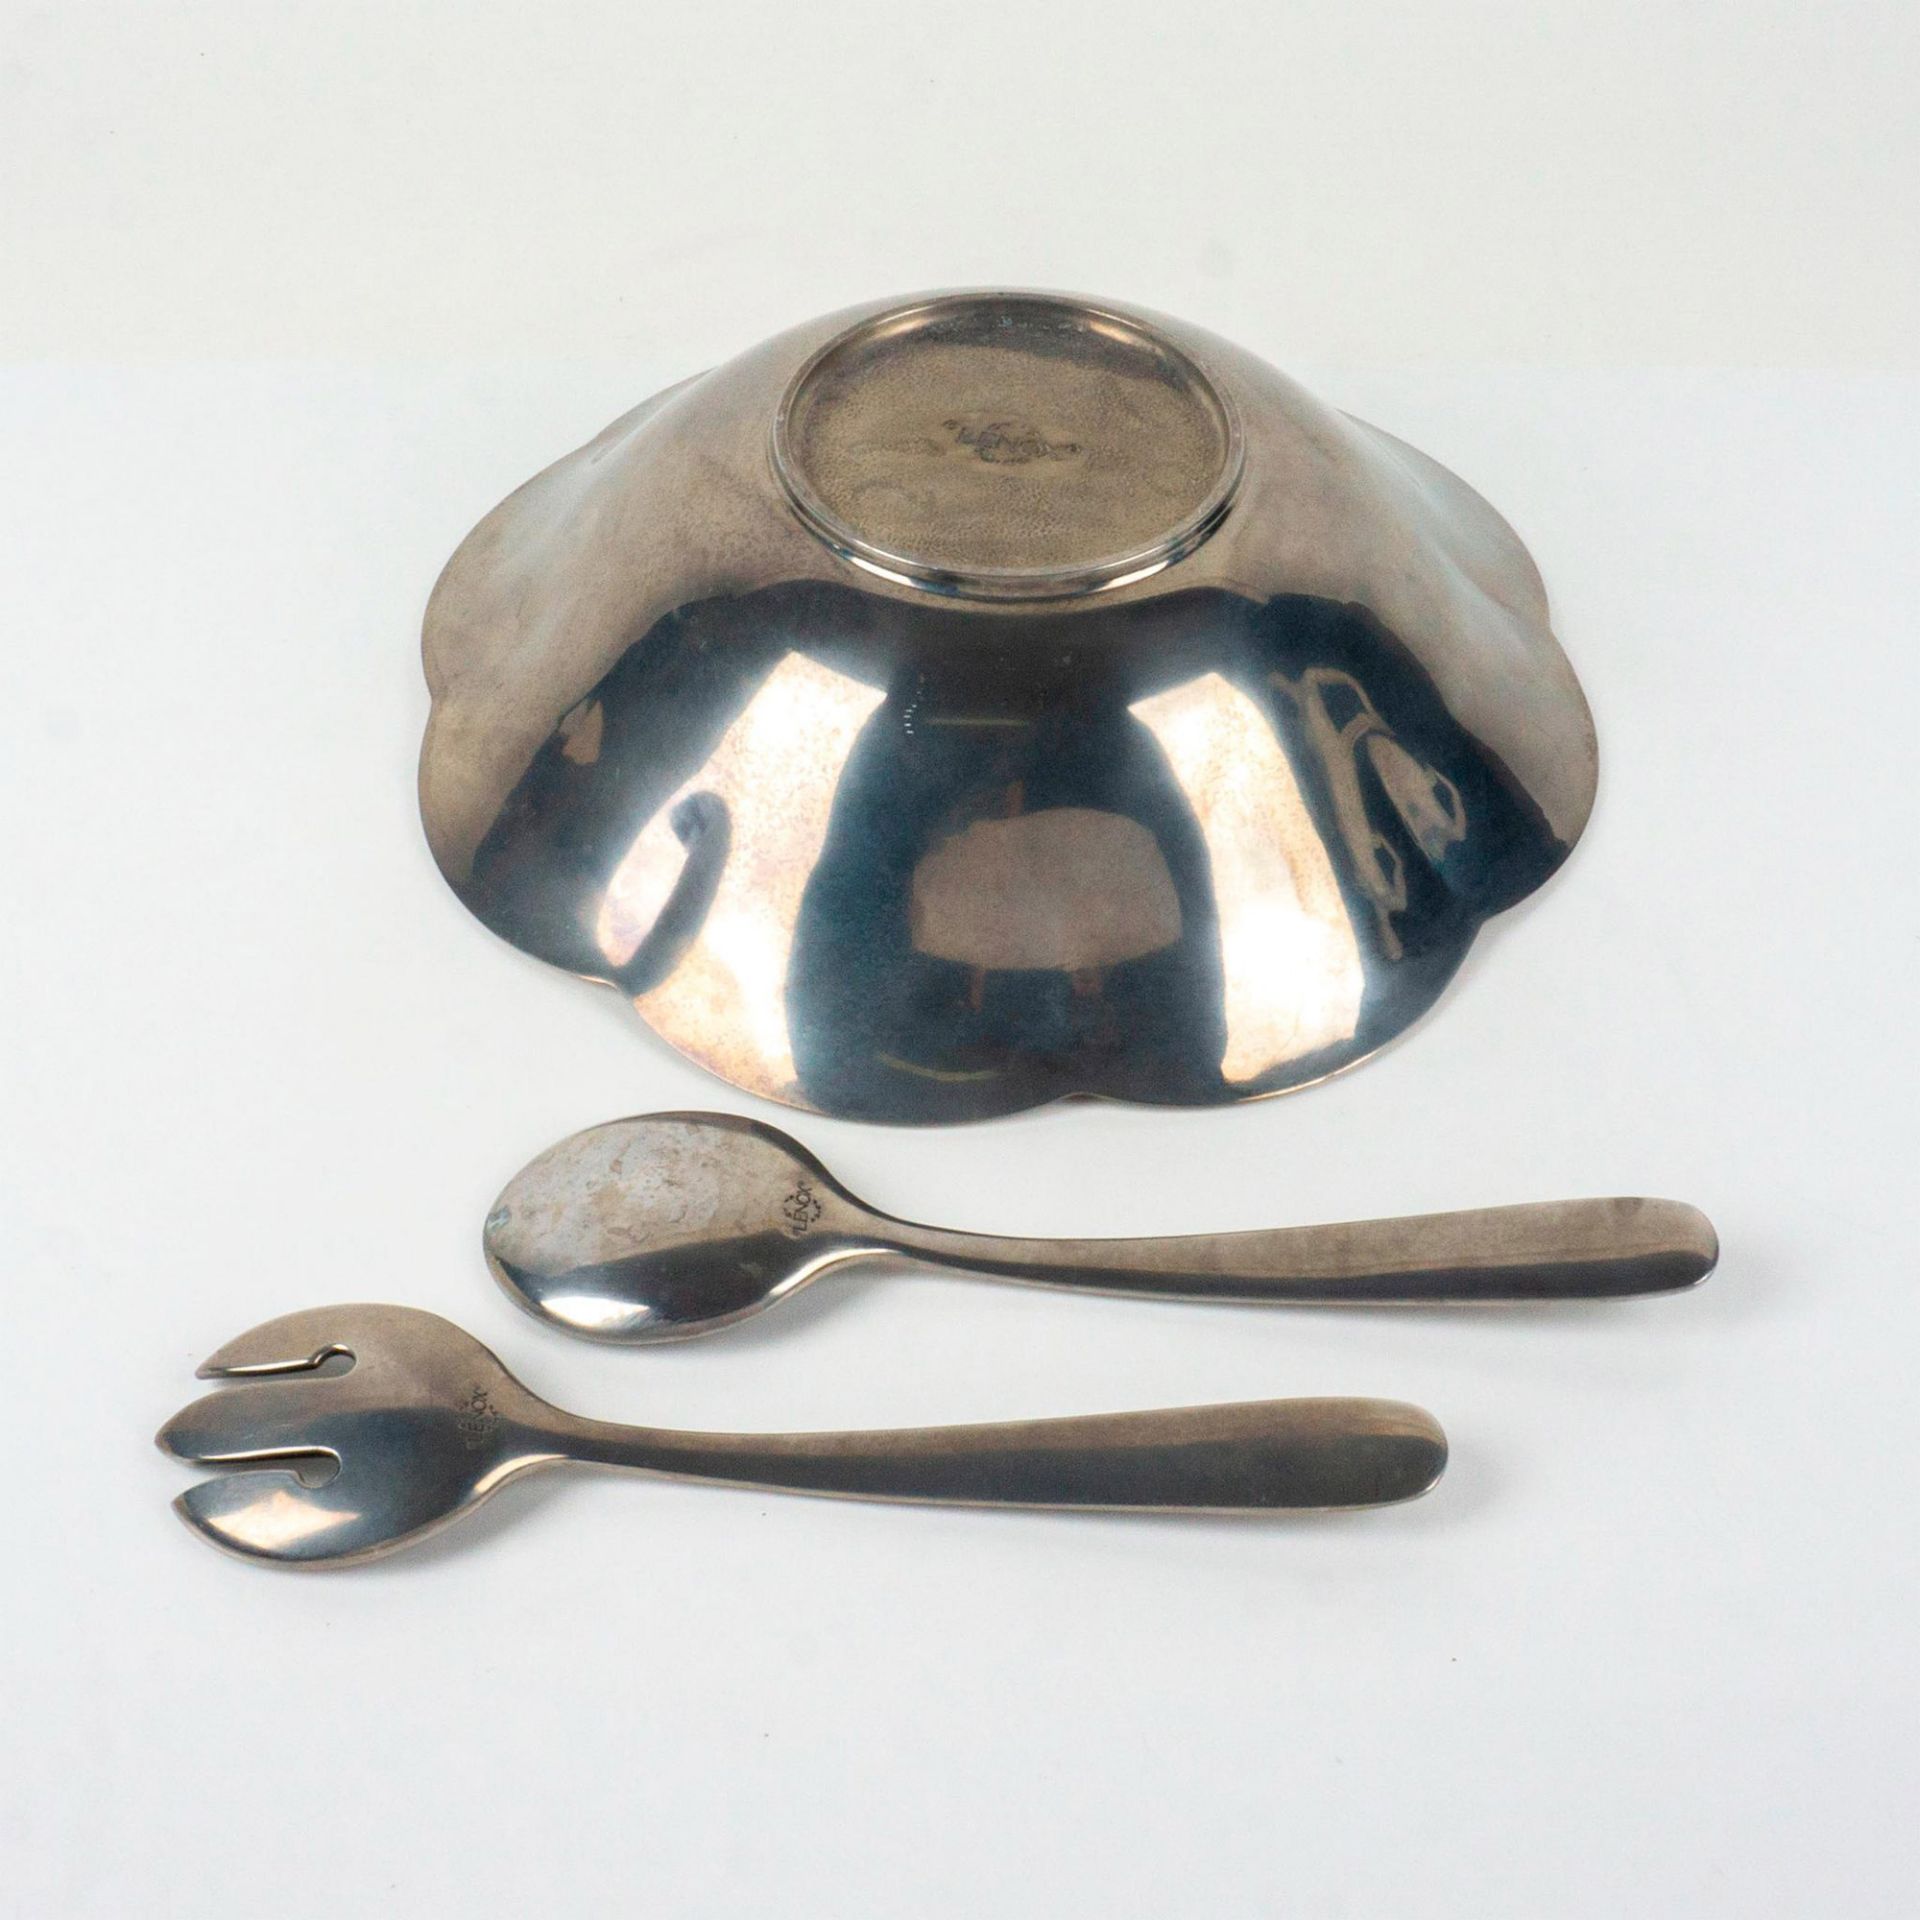 Lenox Salad Bowl With Serving Fork and Spoon - Image 3 of 4